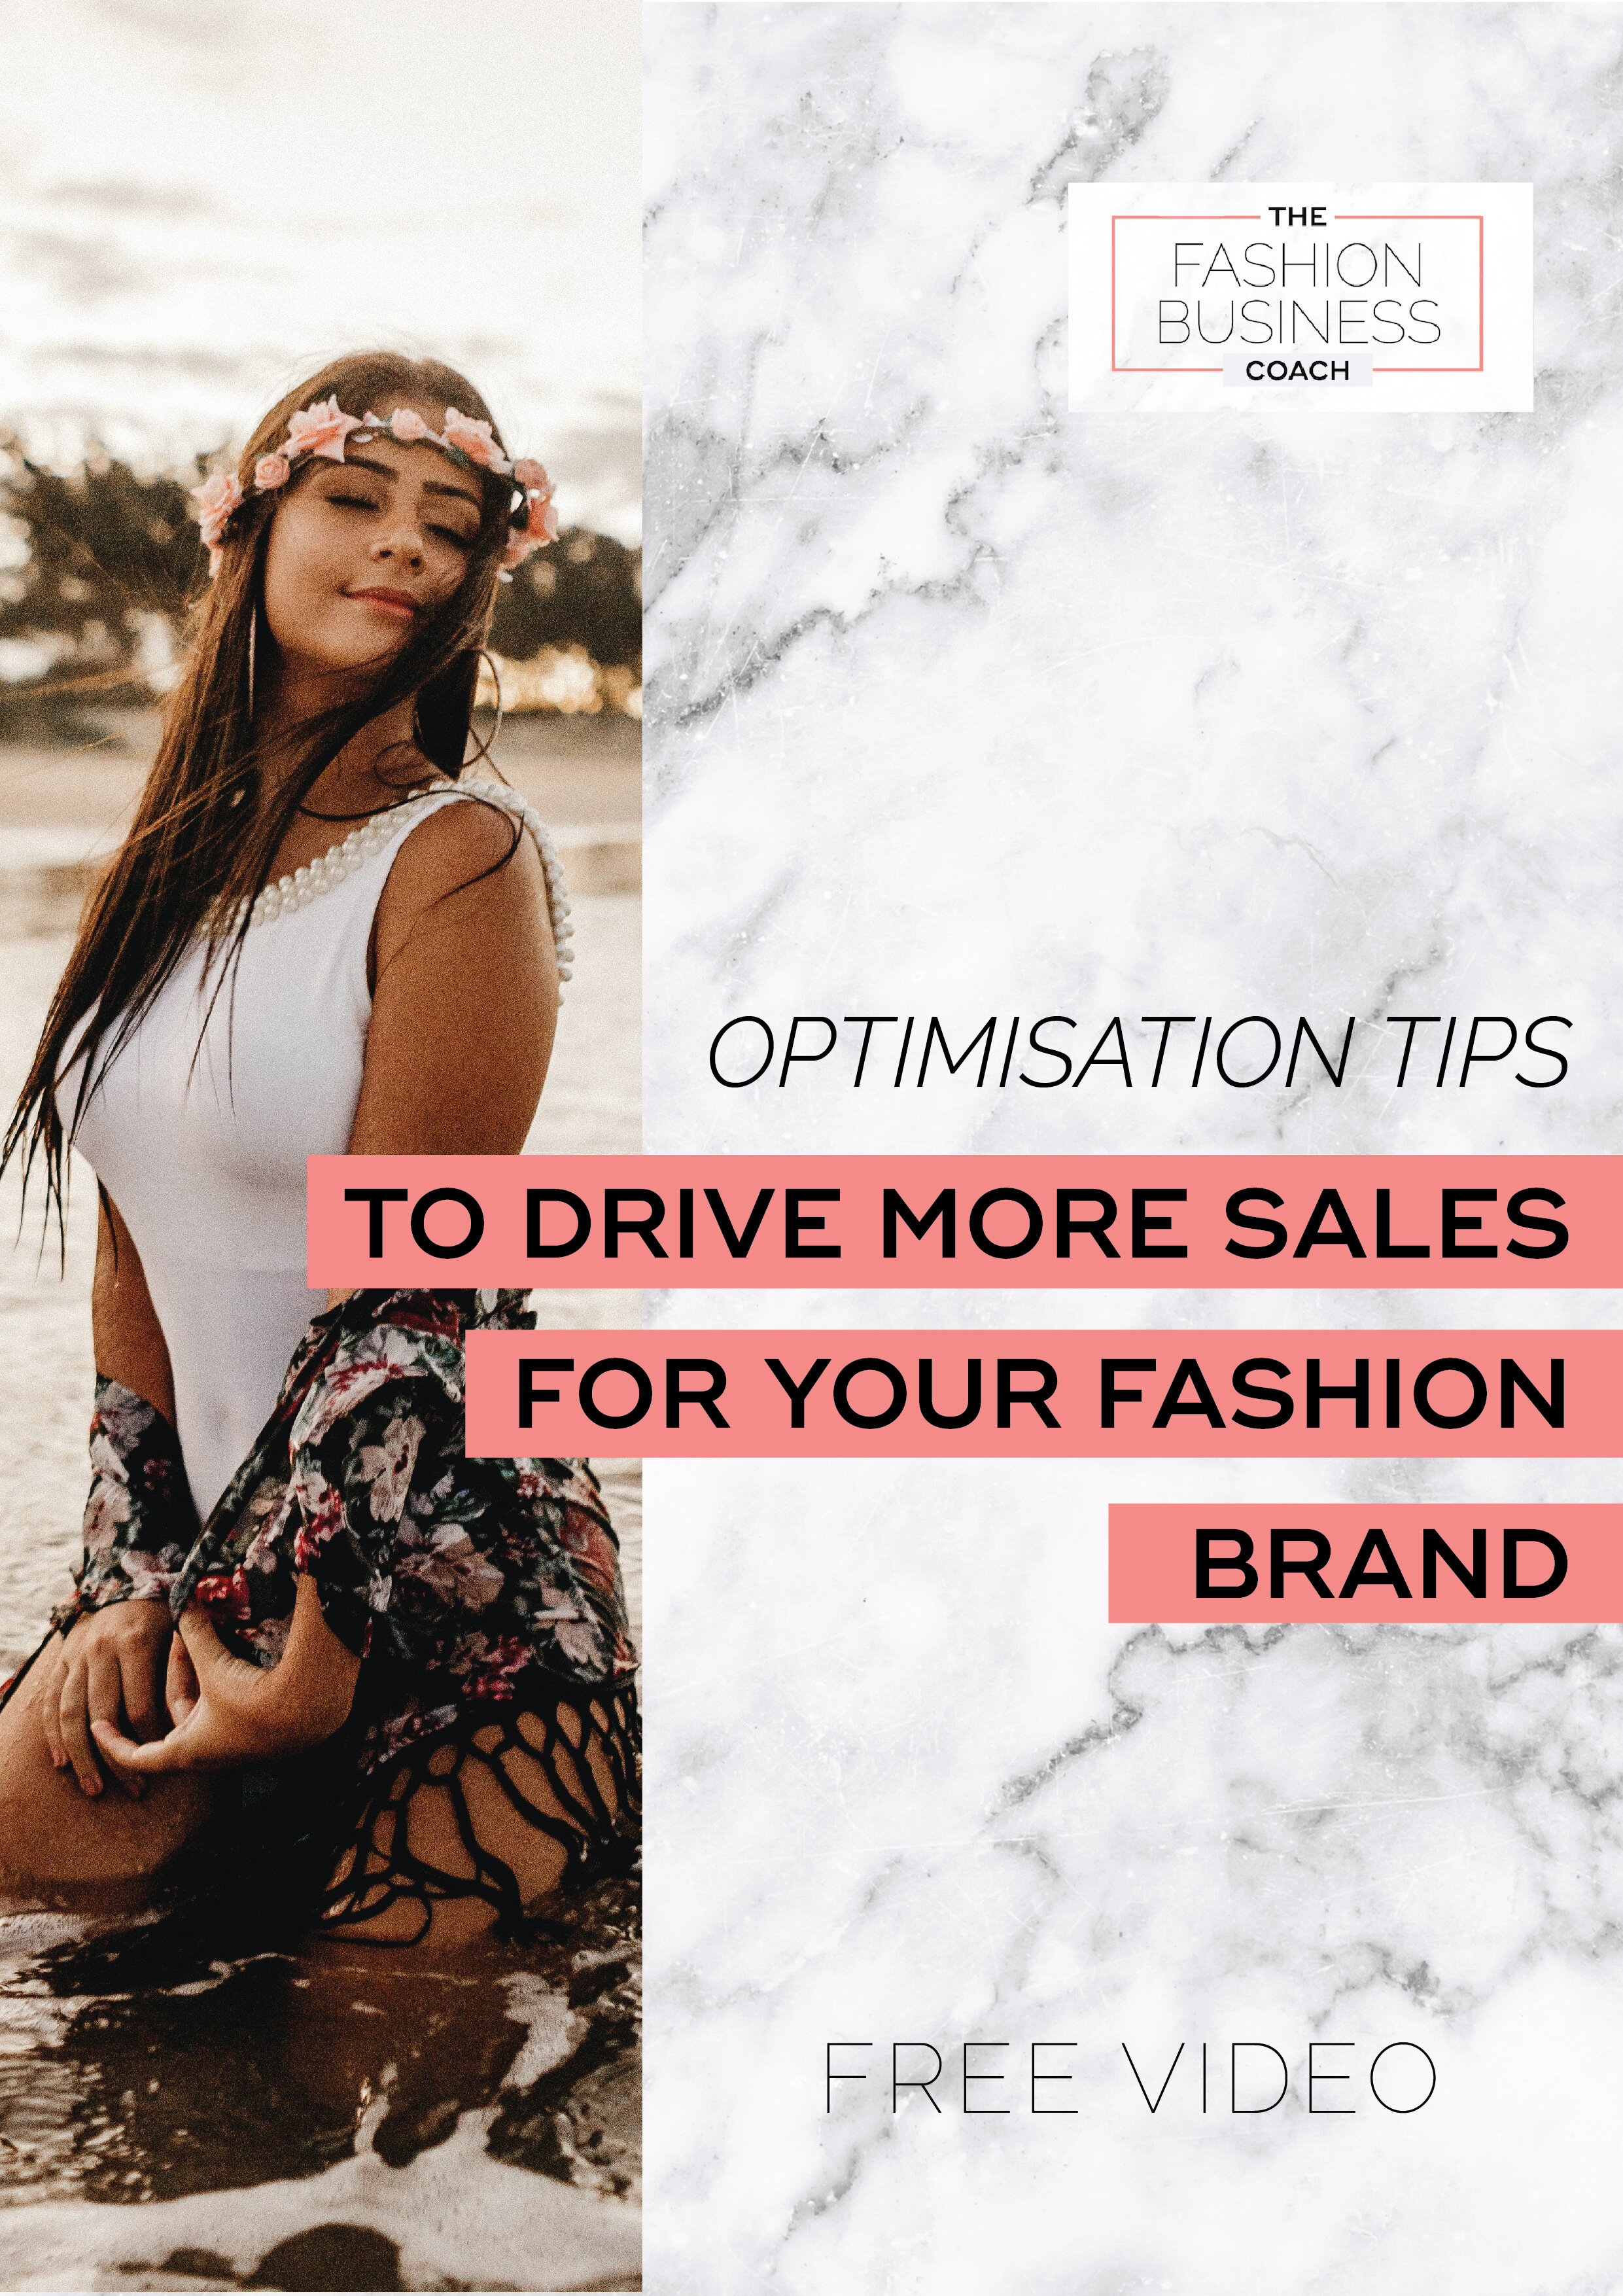 Optimisation Tips to Drive More Sales for your Fashion Brand2.jpg